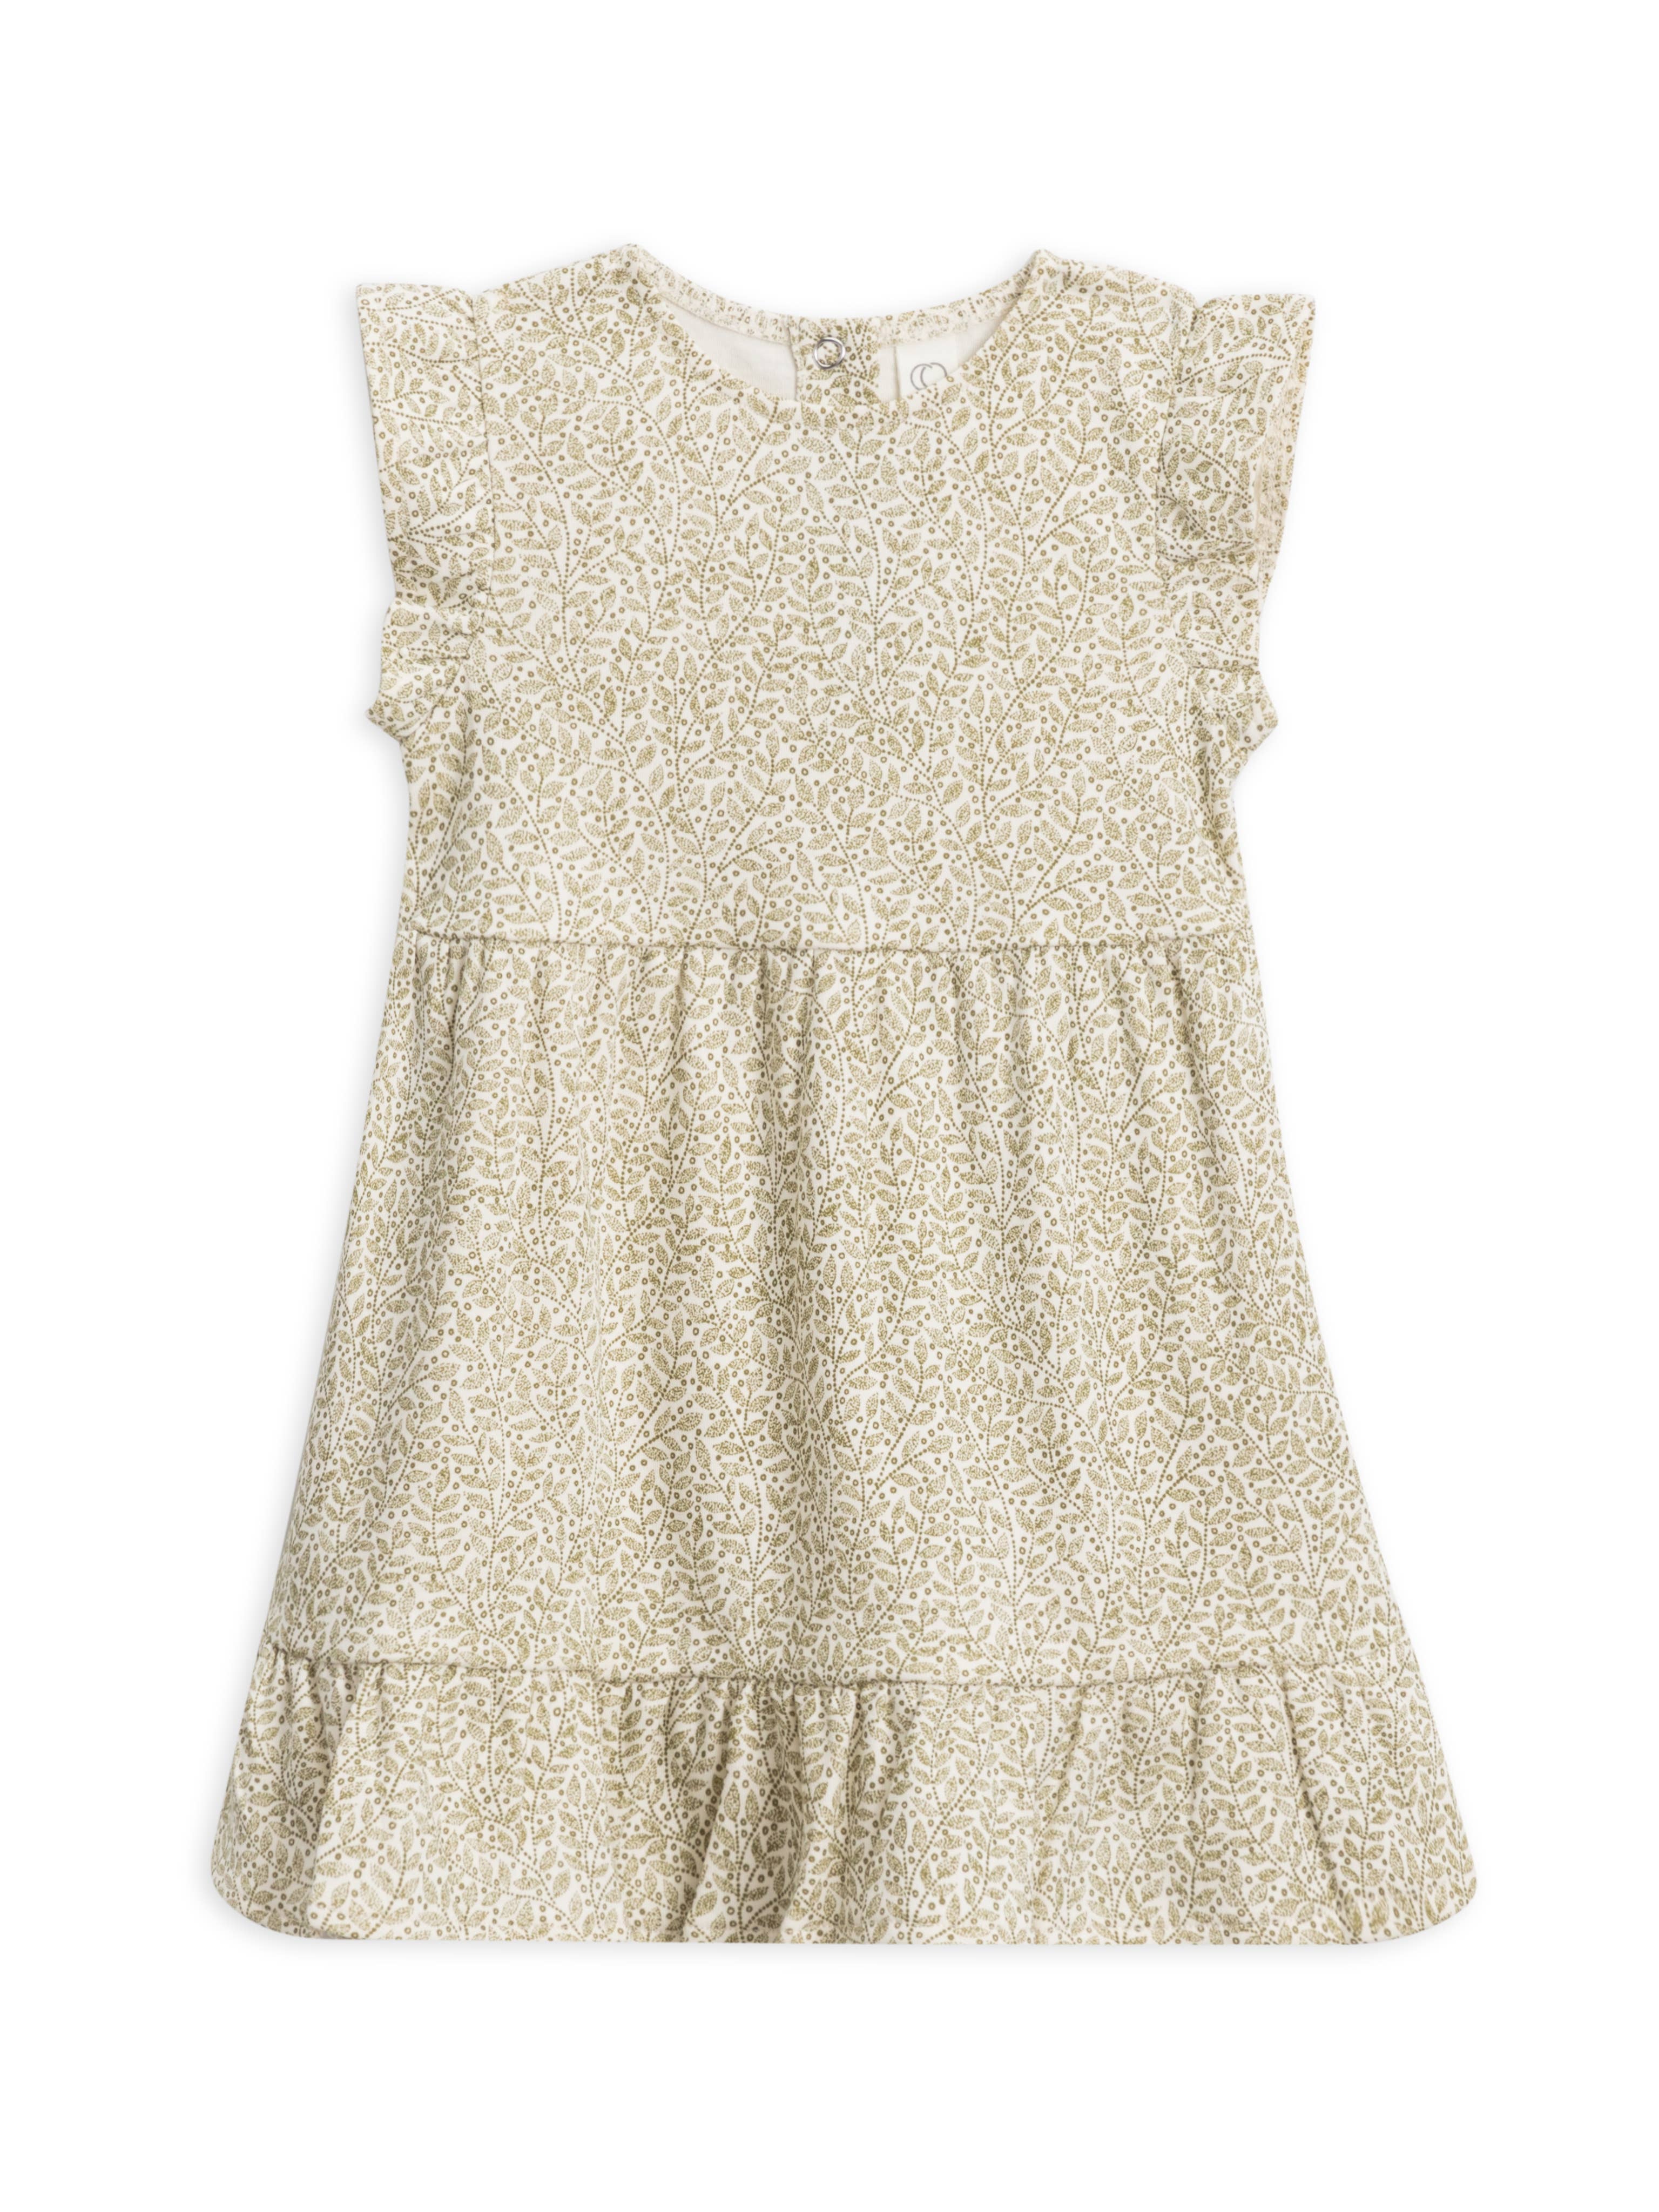 Colored Organics - Organic Baby and Kids Tilly Tiered Dress - Fern + Ivory